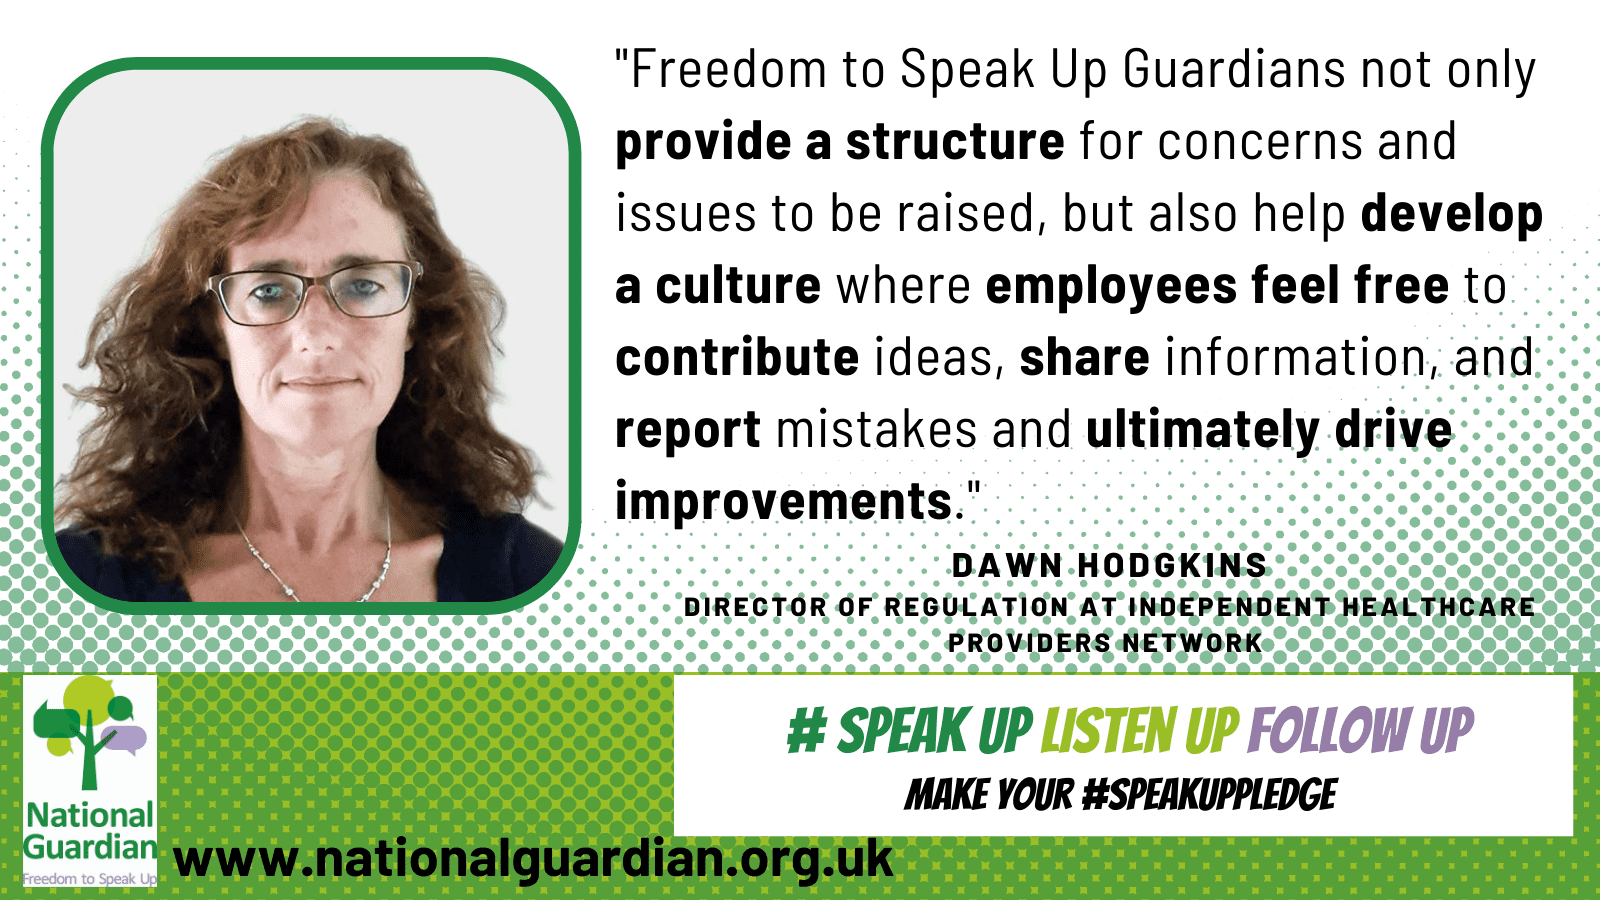 Image of Dawn Hodgkins and quote from blog ""Freedom to Speak Up Guardians not only provide a structure for concerns and issues to be raised, but also help develop a culture where employees feel free to contribute ideas, share information, and report mistakes and ultimately drive improvements."